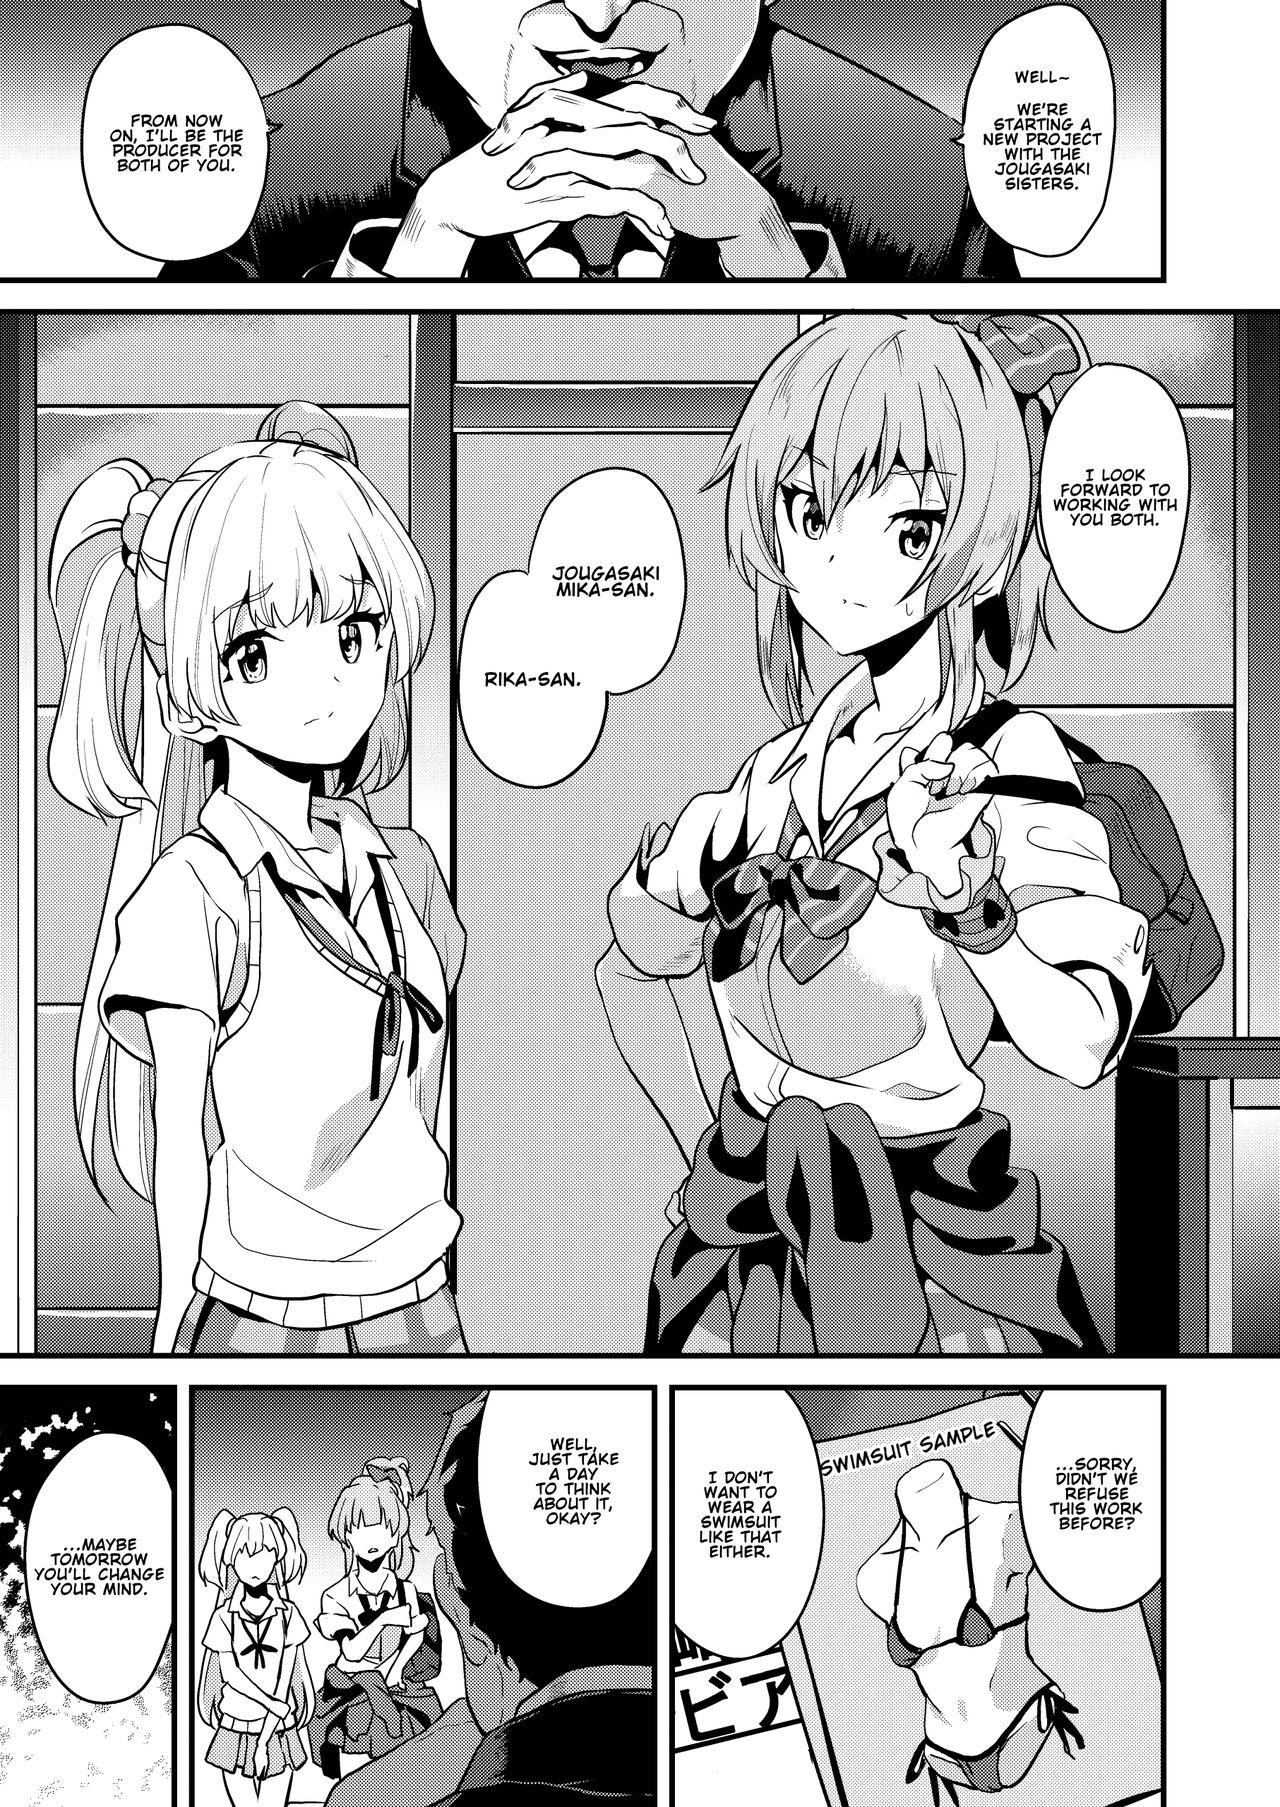 Exhib DOUBLE BIND - The idolmaster One - Page 2